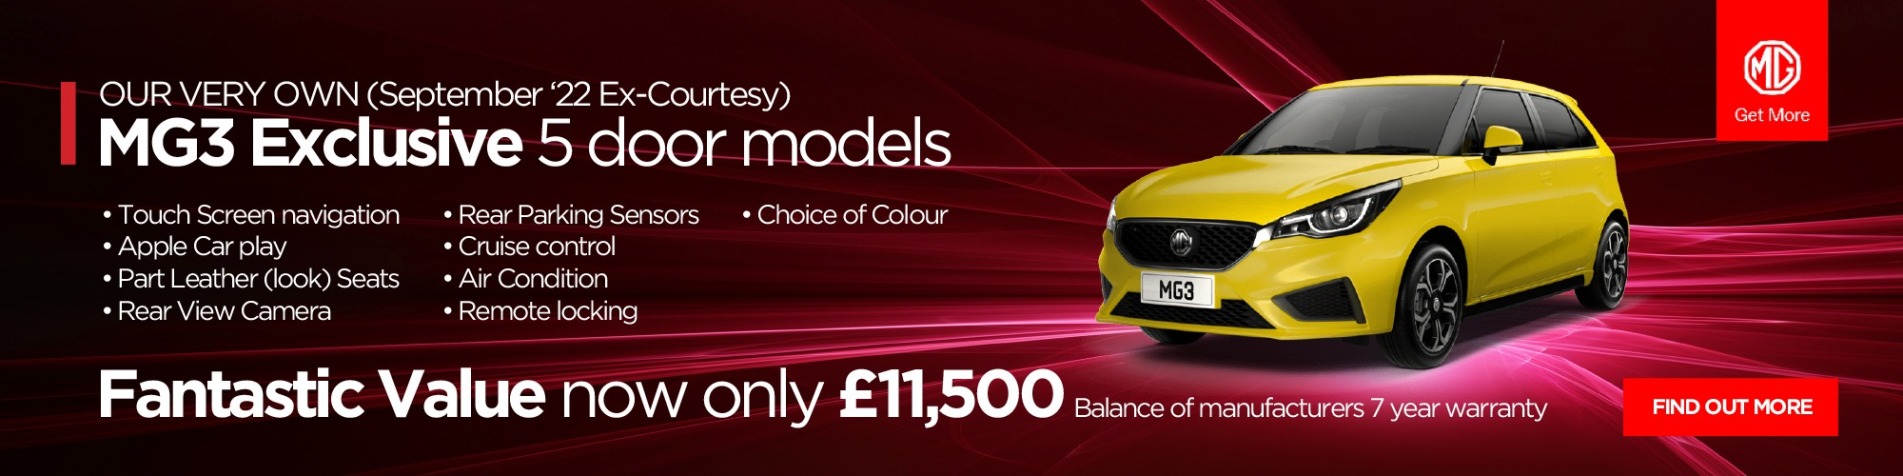 MG3 Extra £500 Saving Offer Banner